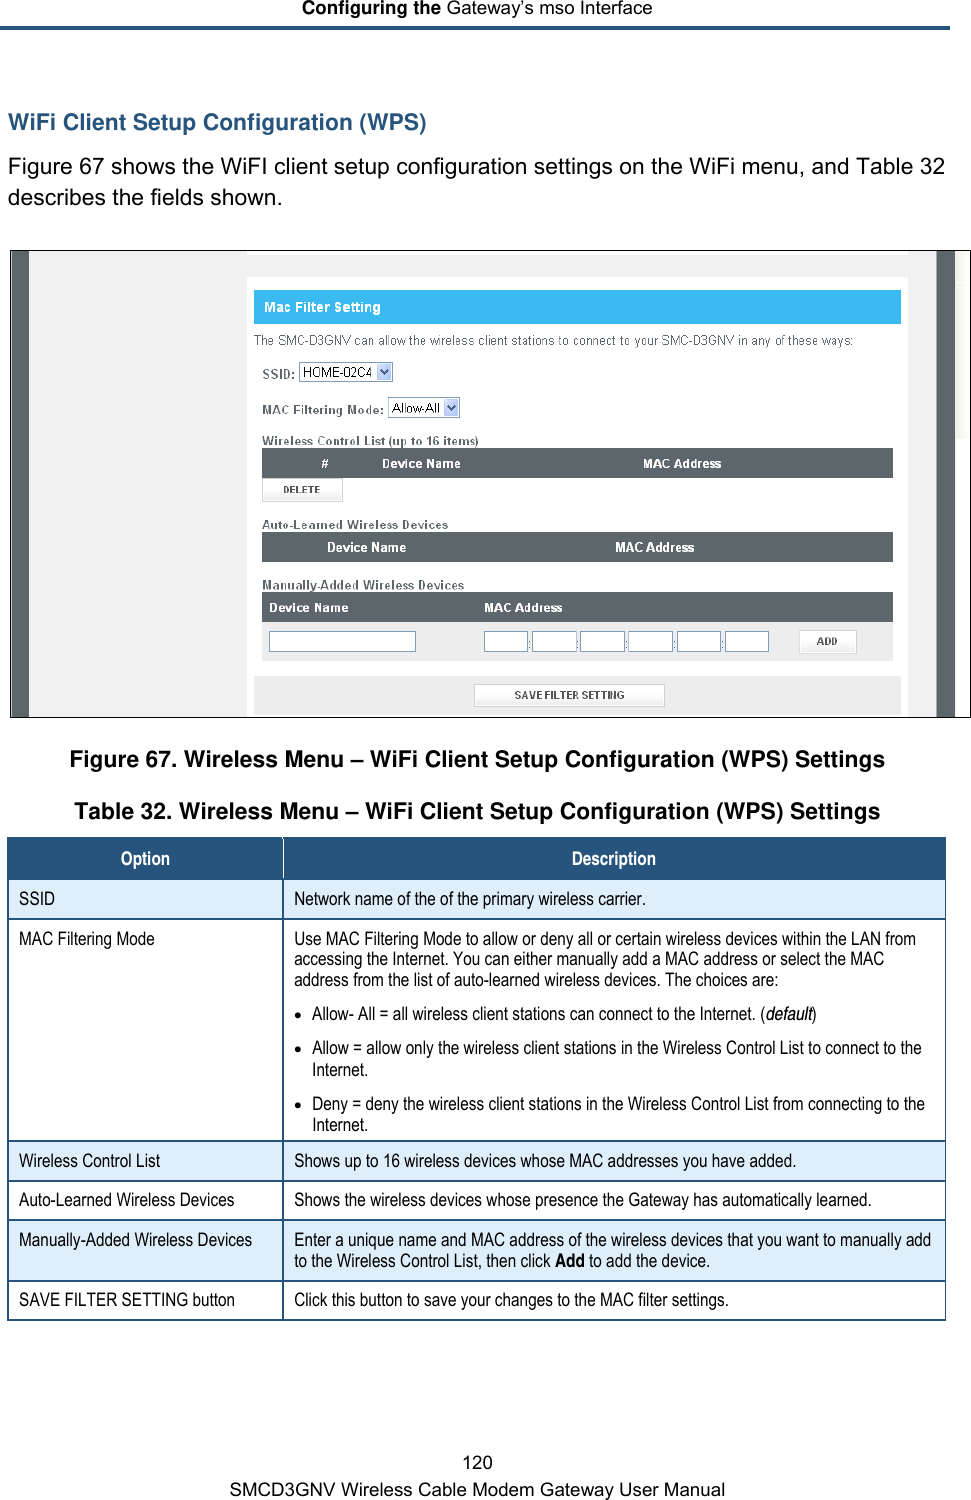 Configuring the Gateway’s mso Interface 120 SMCD3GNV Wireless Cable Modem Gateway User Manual WiFi Client Setup Configuration (WPS) Figure 67 shows the WiFI client setup configuration settings on the WiFi menu, and Table 32 describes the fields shown.  Figure 67. Wireless Menu – WiFi Client Setup Configuration (WPS) Settings Table 32. Wireless Menu – WiFi Client Setup Configuration (WPS) Settings Option Description SSID  Network name of the of the primary wireless carrier. MAC Filtering Mode Use MAC Filtering Mode to allow or deny all or certain wireless devices within the LAN from accessing the Internet. You can either manually add a MAC address or select the MAC address from the list of auto-learned wireless devices. The choices are: • Allow- All = all wireless client stations can connect to the Internet. (default) • Allow = allow only the wireless client stations in the Wireless Control List to connect to the Internet. • Deny = deny the wireless client stations in the Wireless Control List from connecting to the Internet. Wireless Control List Shows up to 16 wireless devices whose MAC addresses you have added. Auto-Learned Wireless Devices Shows the wireless devices whose presence the Gateway has automatically learned. Manually-Added Wireless Devices Enter a unique name and MAC address of the wireless devices that you want to manually add to the Wireless Control List, then click Add to add the device. SAVE FILTER SETTING button Click this button to save your changes to the MAC filter settings.   